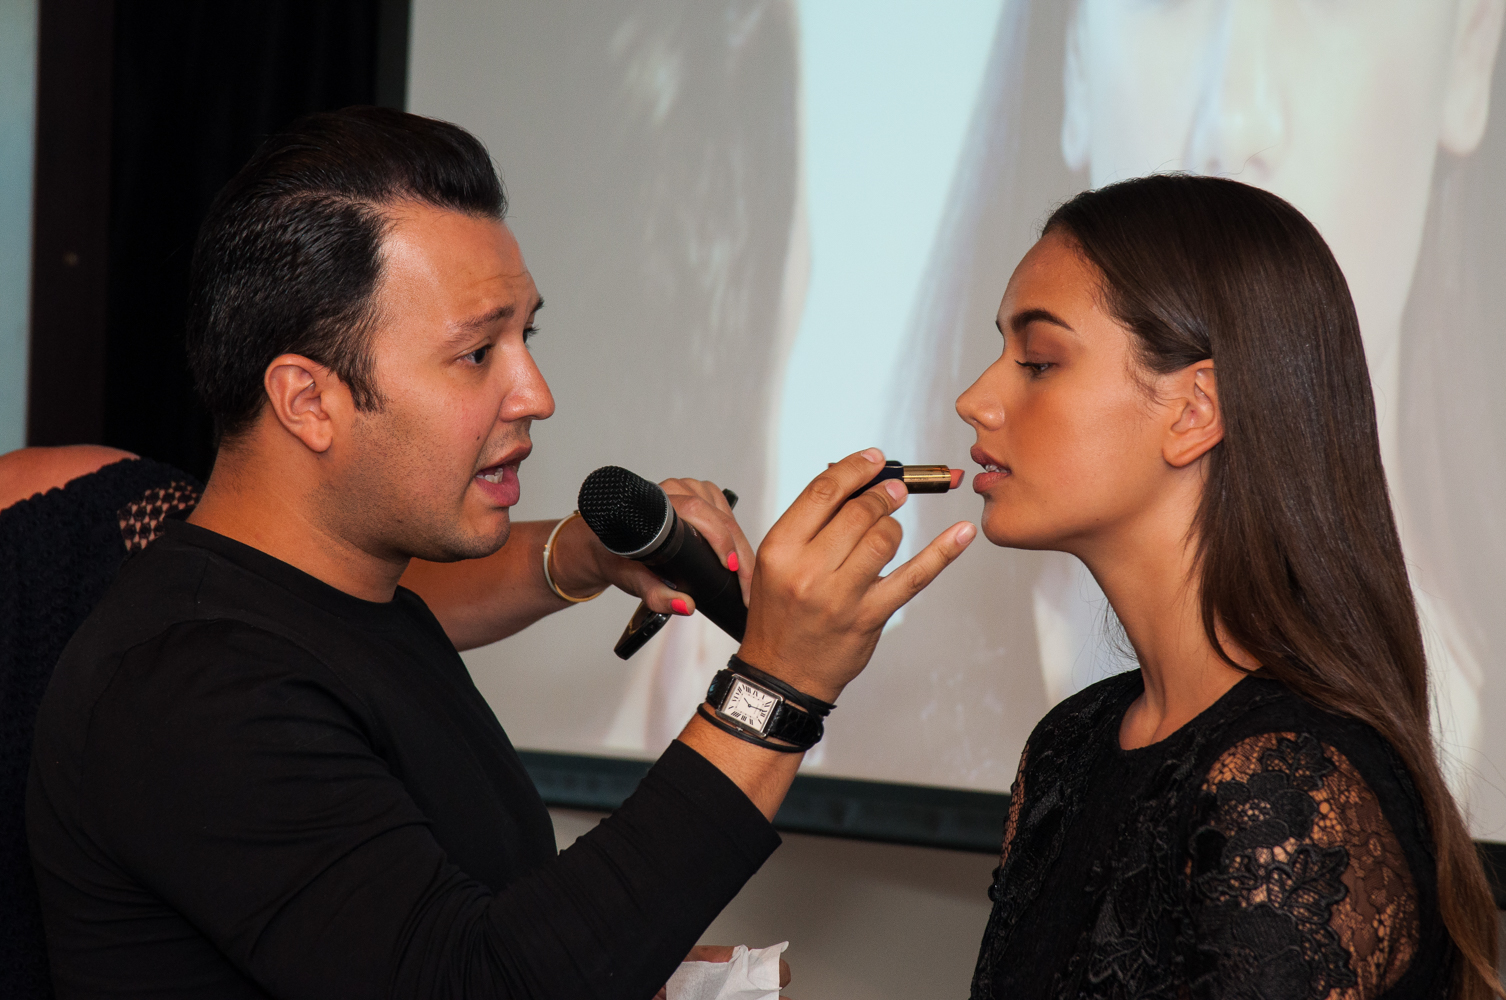 The first makeup look demonstrated by Victor was natural and bronzed.